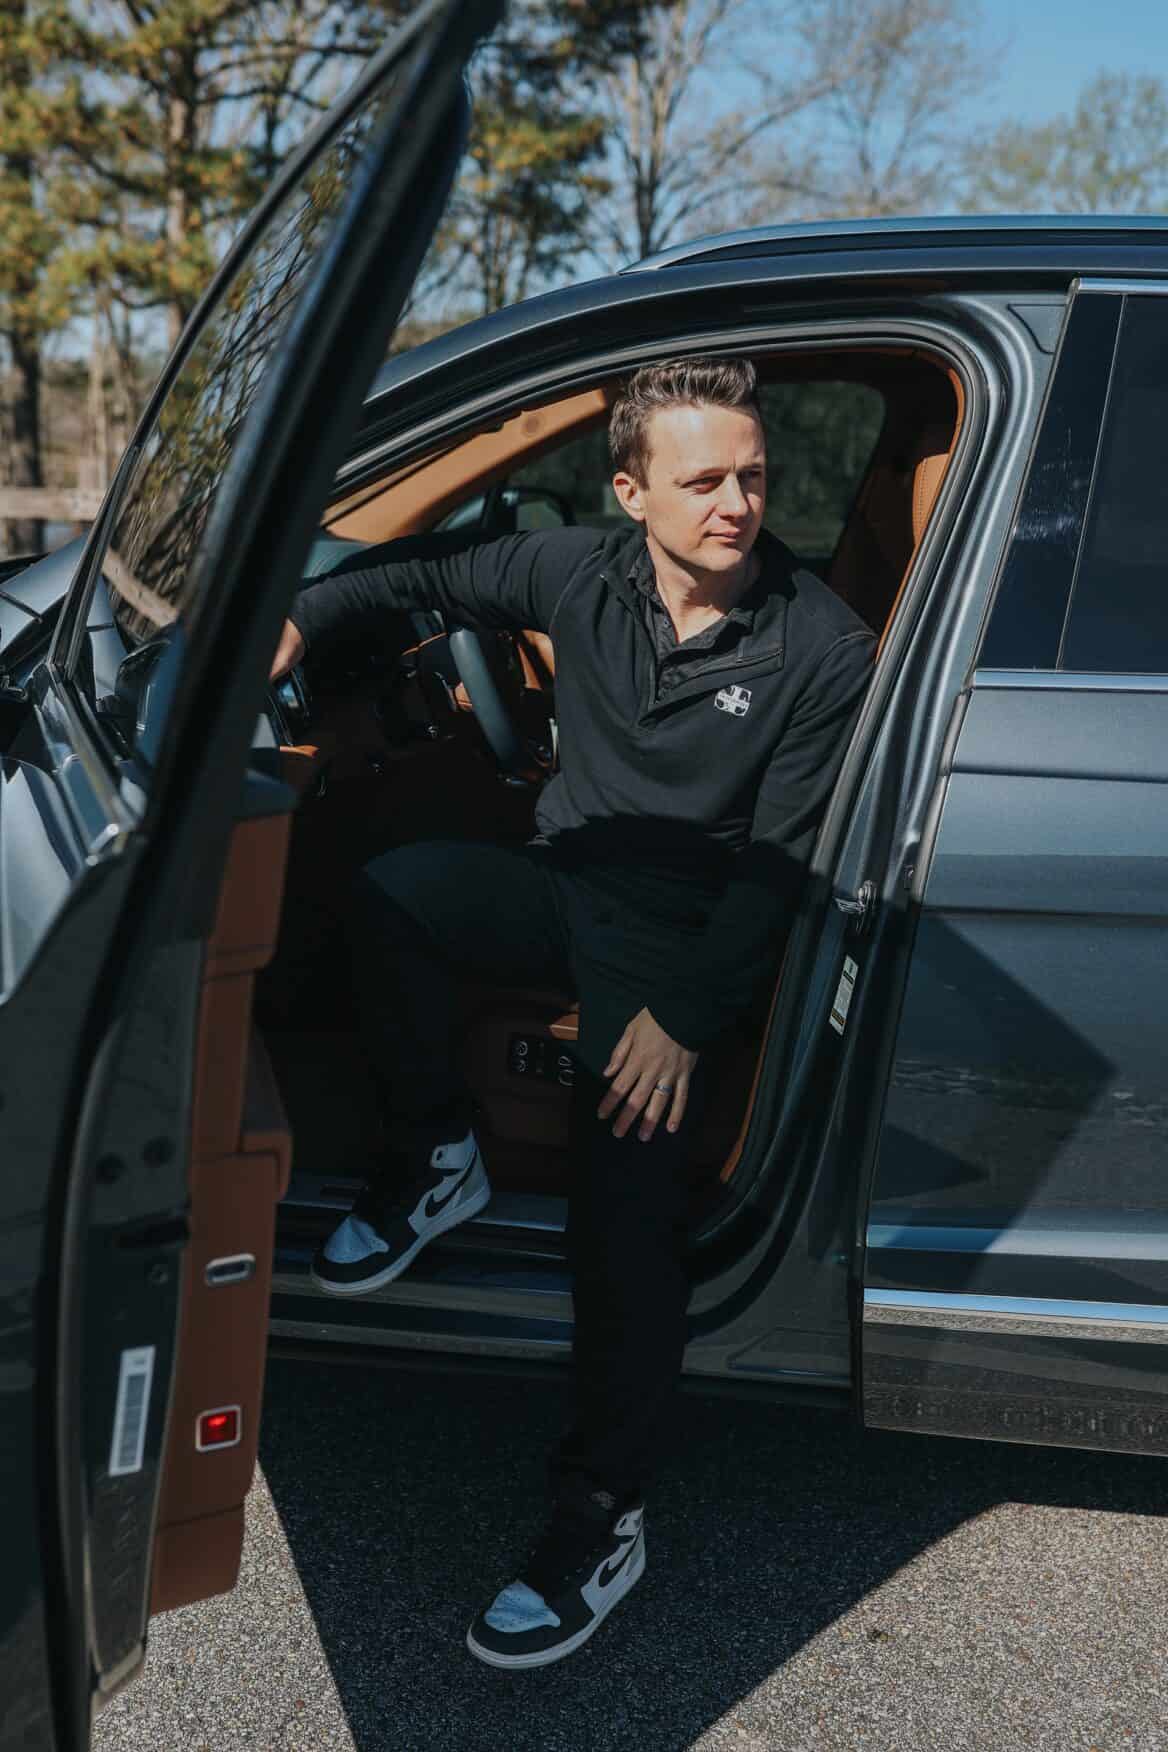 A man in a casual black outfit exits a car, looking to his side with a relaxed posture.